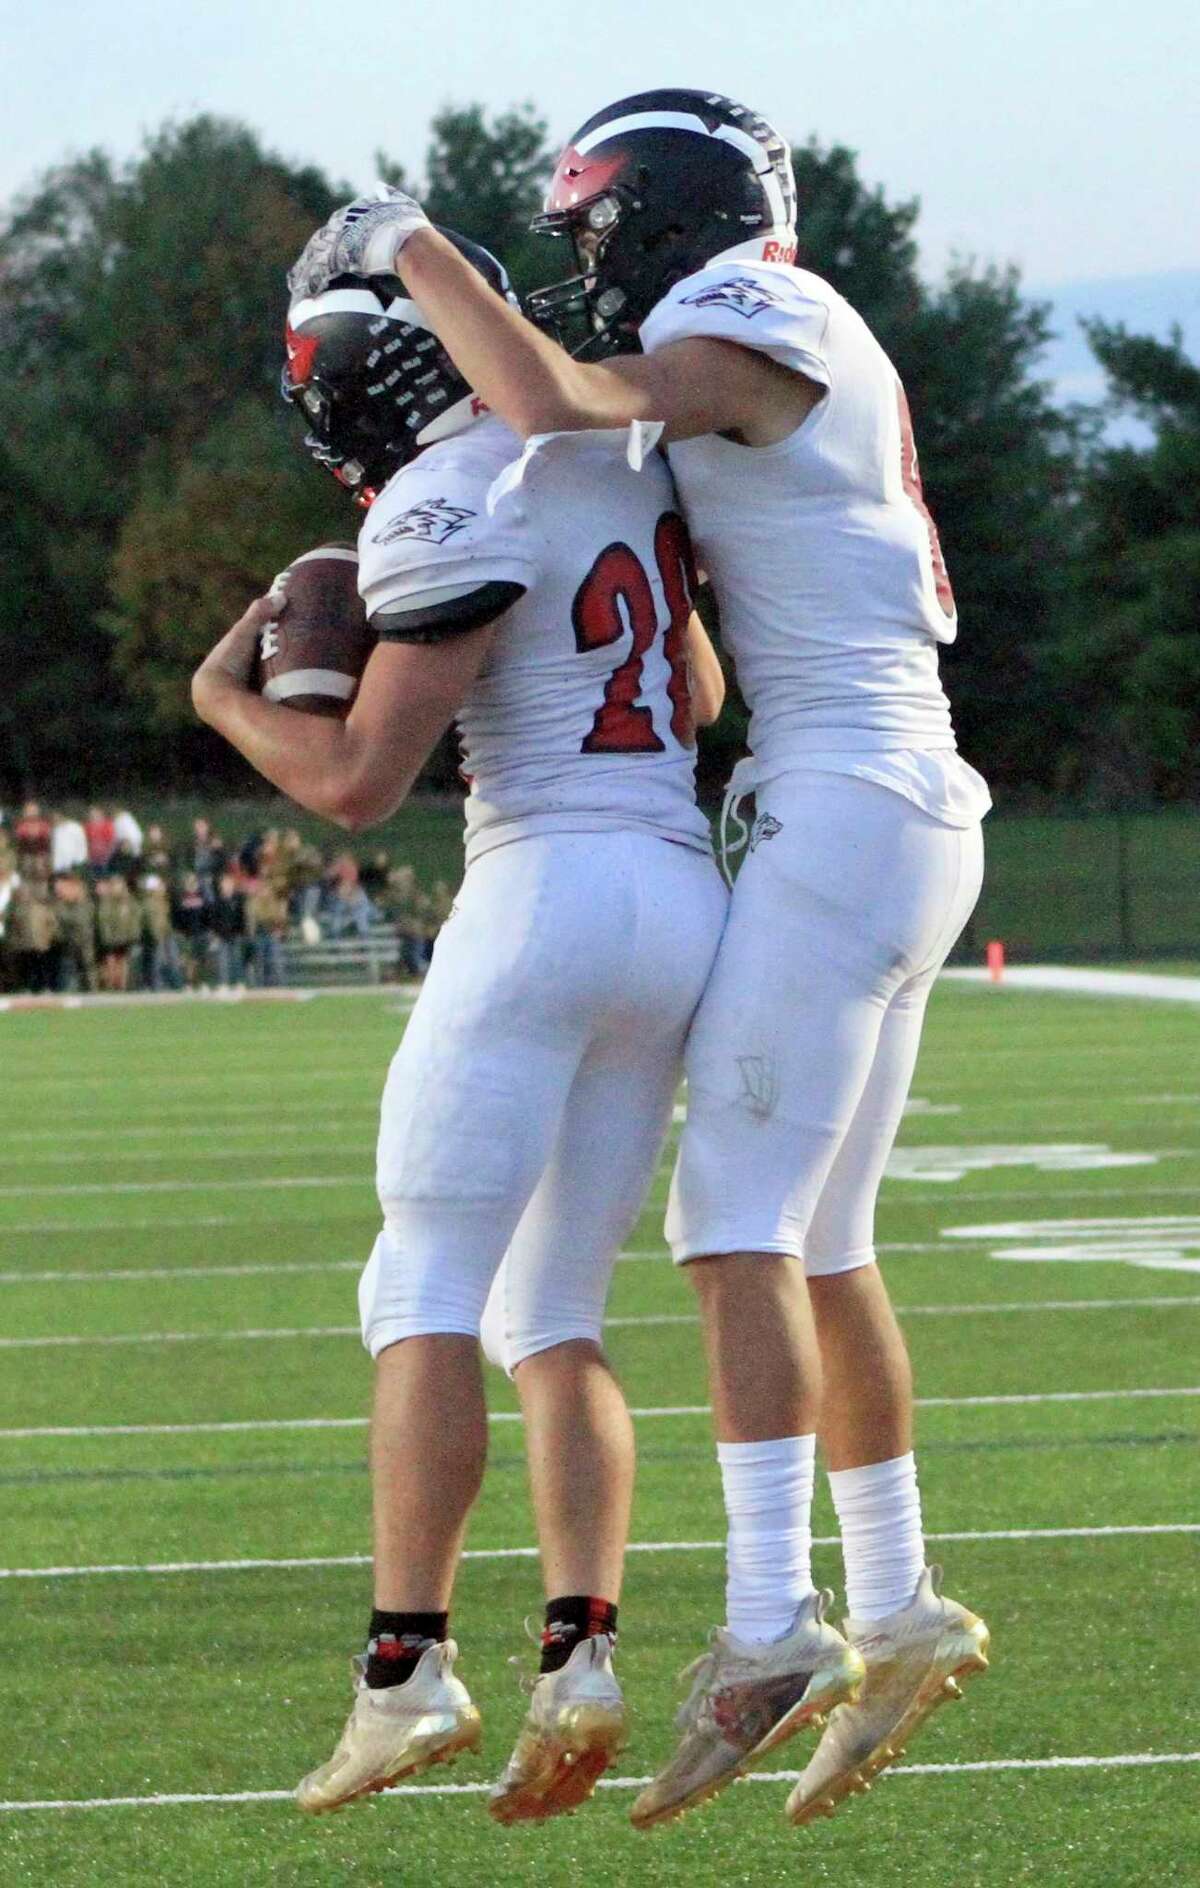 Reed City sophomore Zach Erickson (left) celebrates with junior Seth Jackson in the end zone after scoring a touchdown during Friday night's football game at Cardinal Stadium in Big Rapids. (Pioneer photo/Joe Judd)